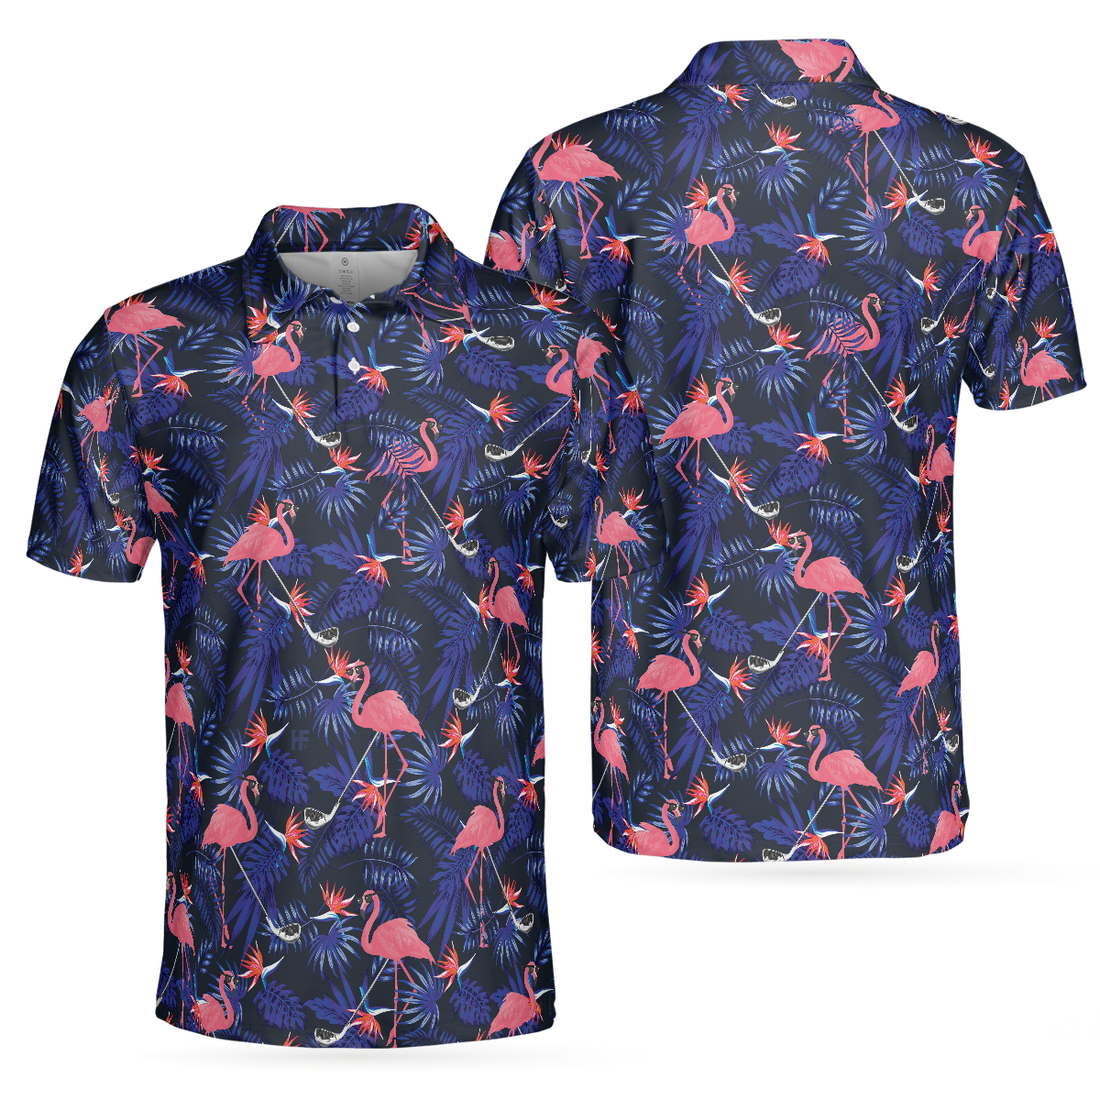 Flower And Flamingo Golf Polo Shirt Blue Flamingo Pattern Shirt For Golf Players Gift For Flamingo Fans - 1